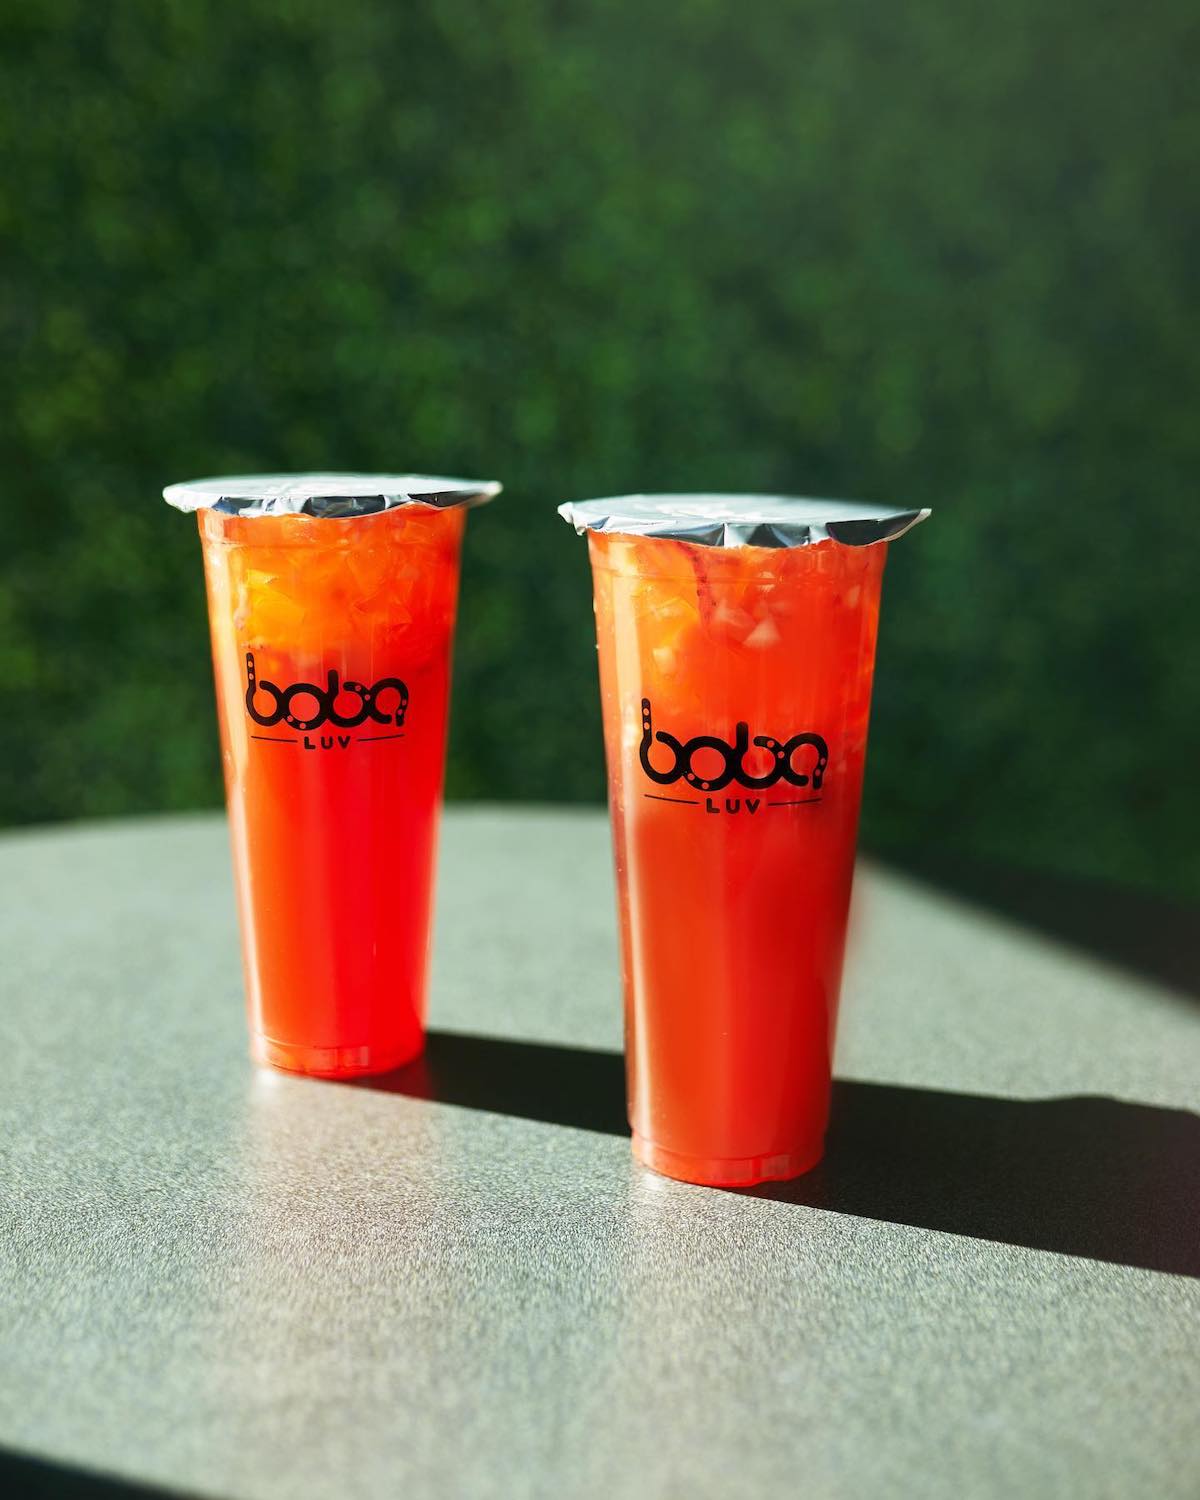 Boba Luv Is Bringing Boba Tea and Hmong-Lao Cuisine to Fairfield  — Opening This Summer